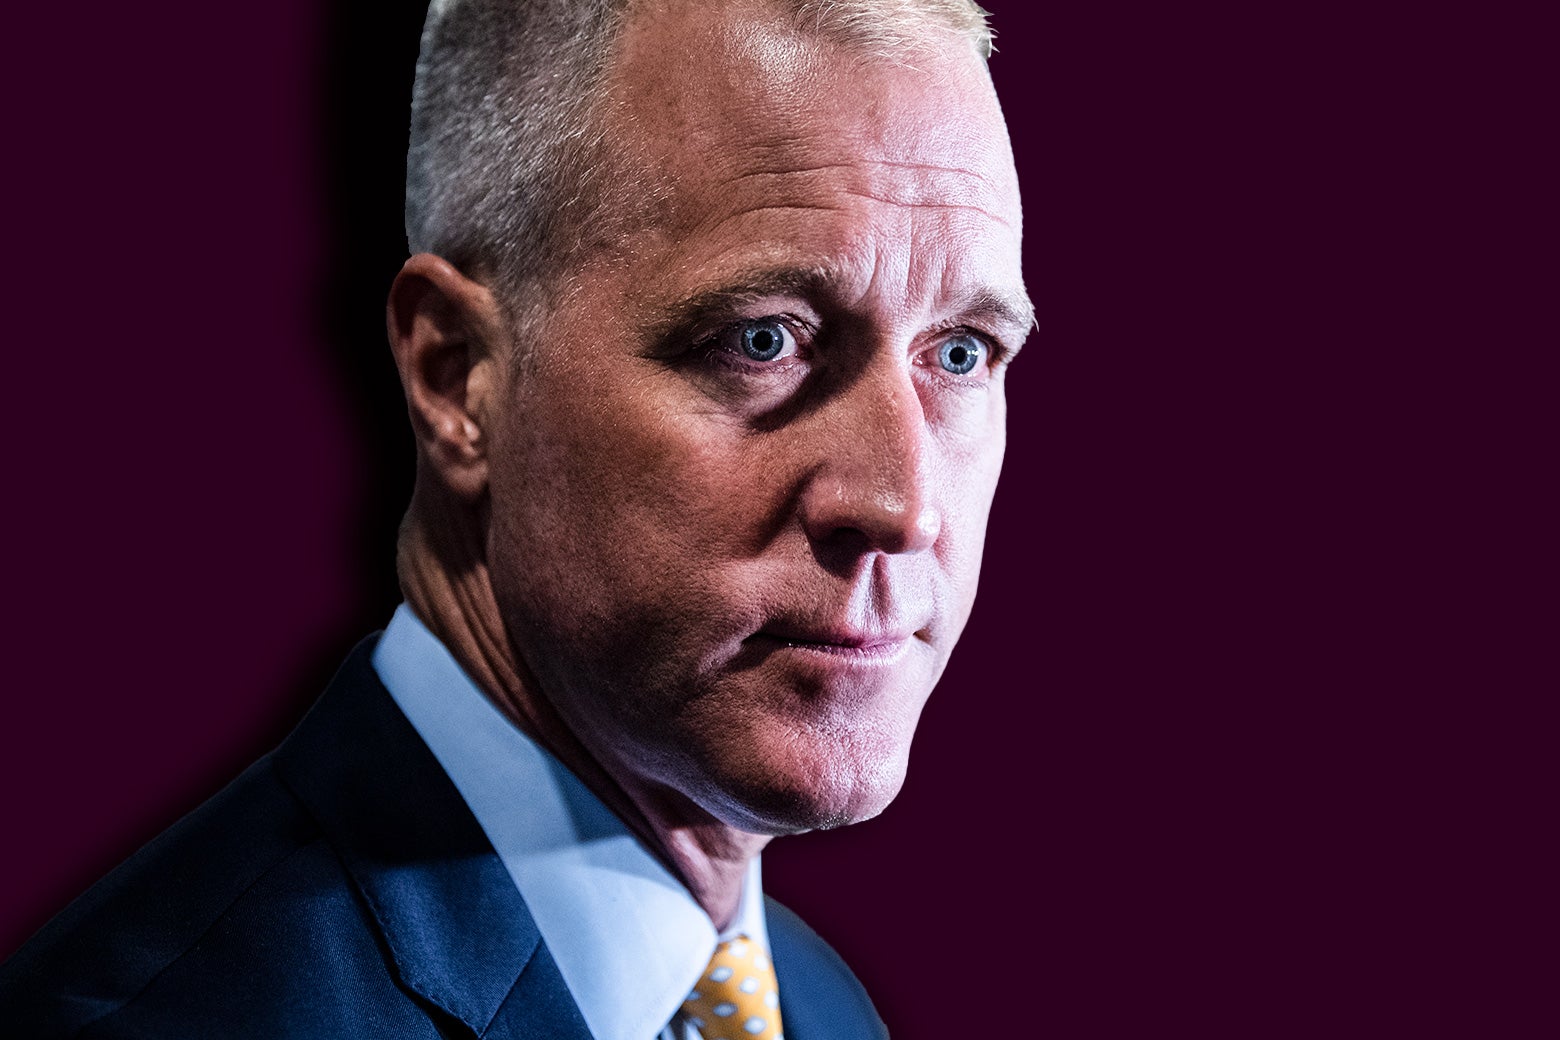 A close-up photo of the face of DCCC chair, Sean Patrick Maloney.